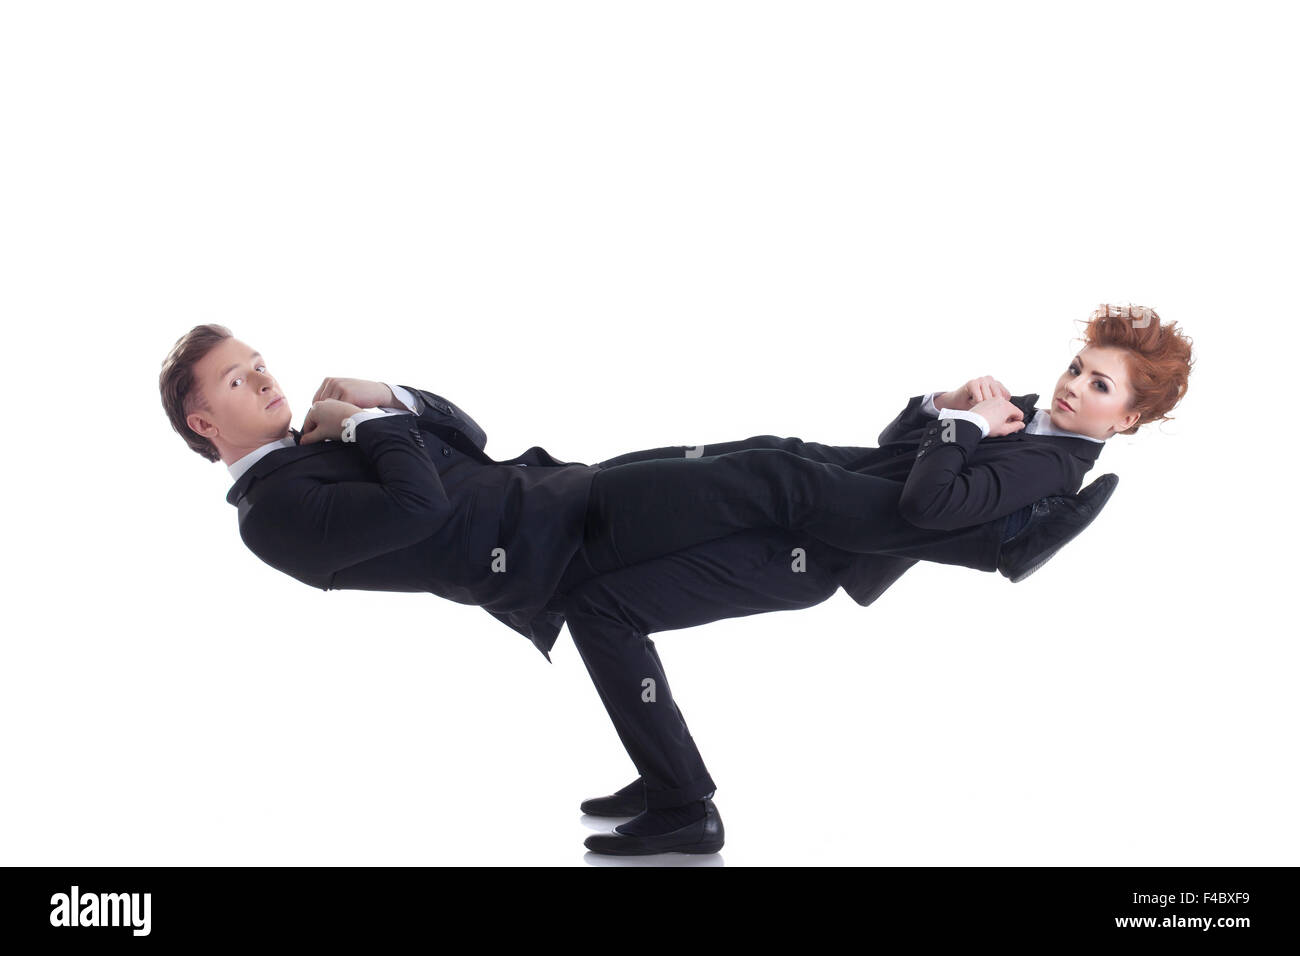 Flexible young people posing as businessmen Stock Photo